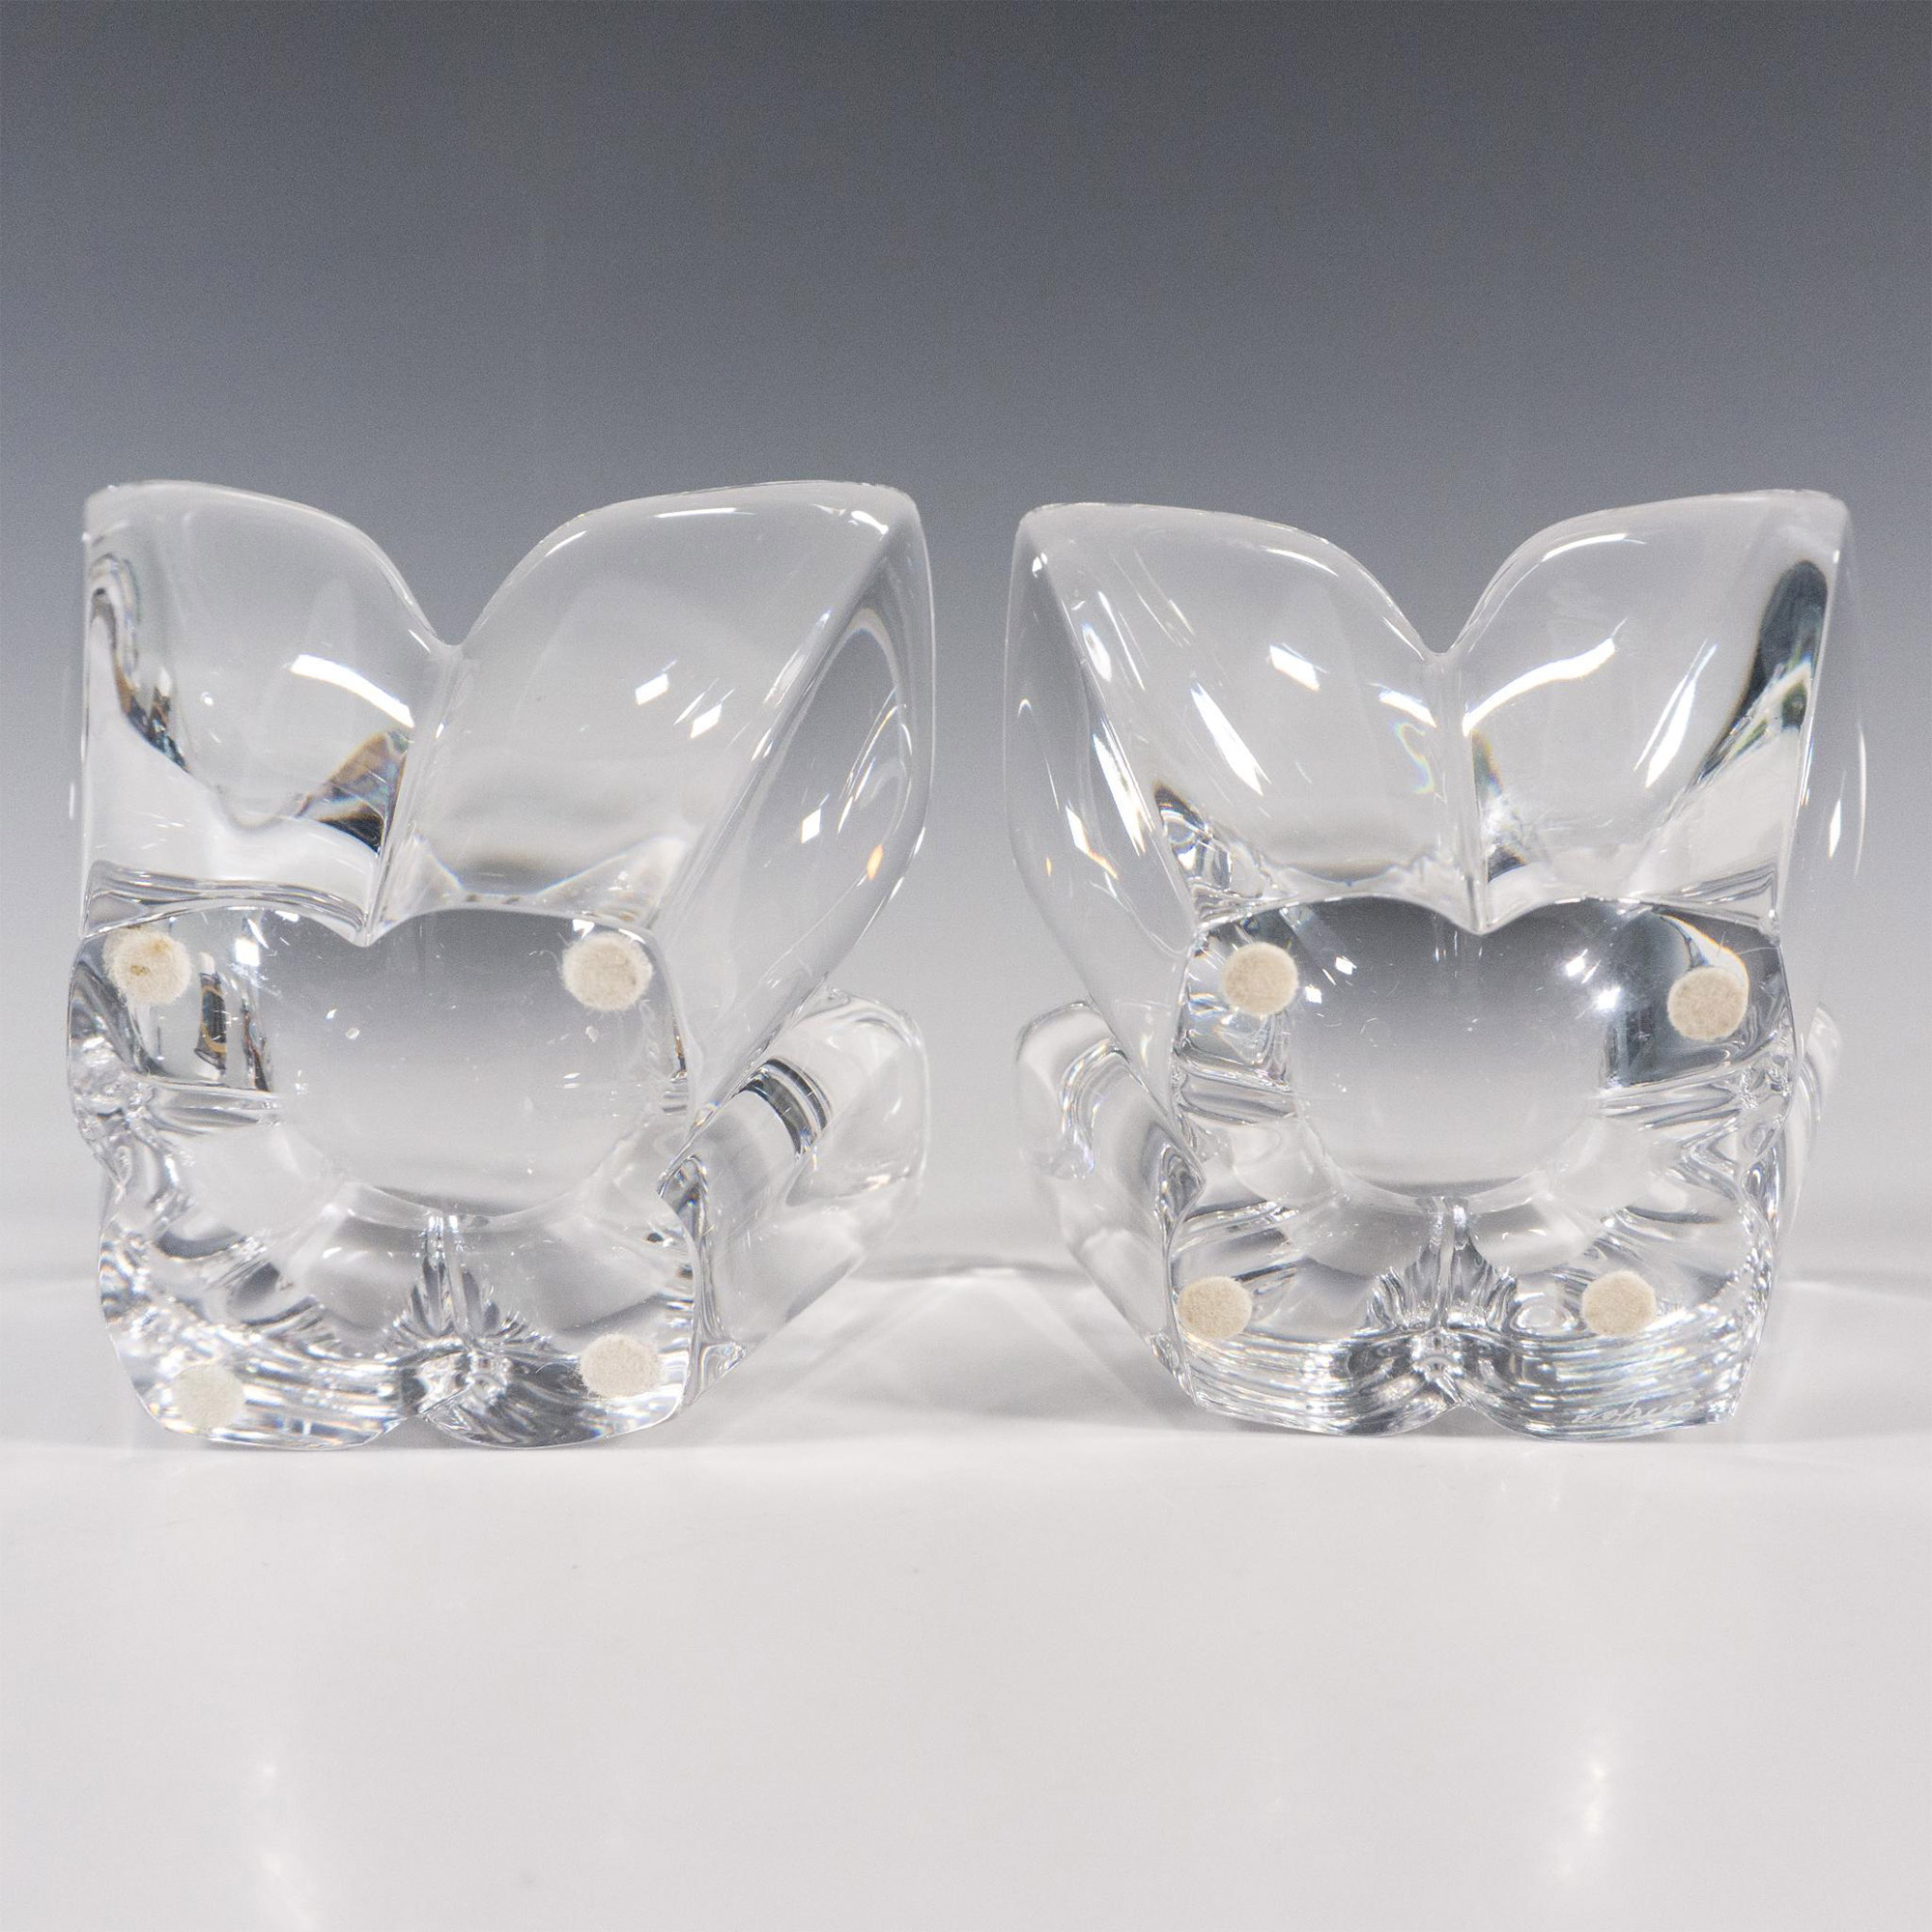 Pair of Orrefors Crystal Candle Holders, Lotus - Image 3 of 4